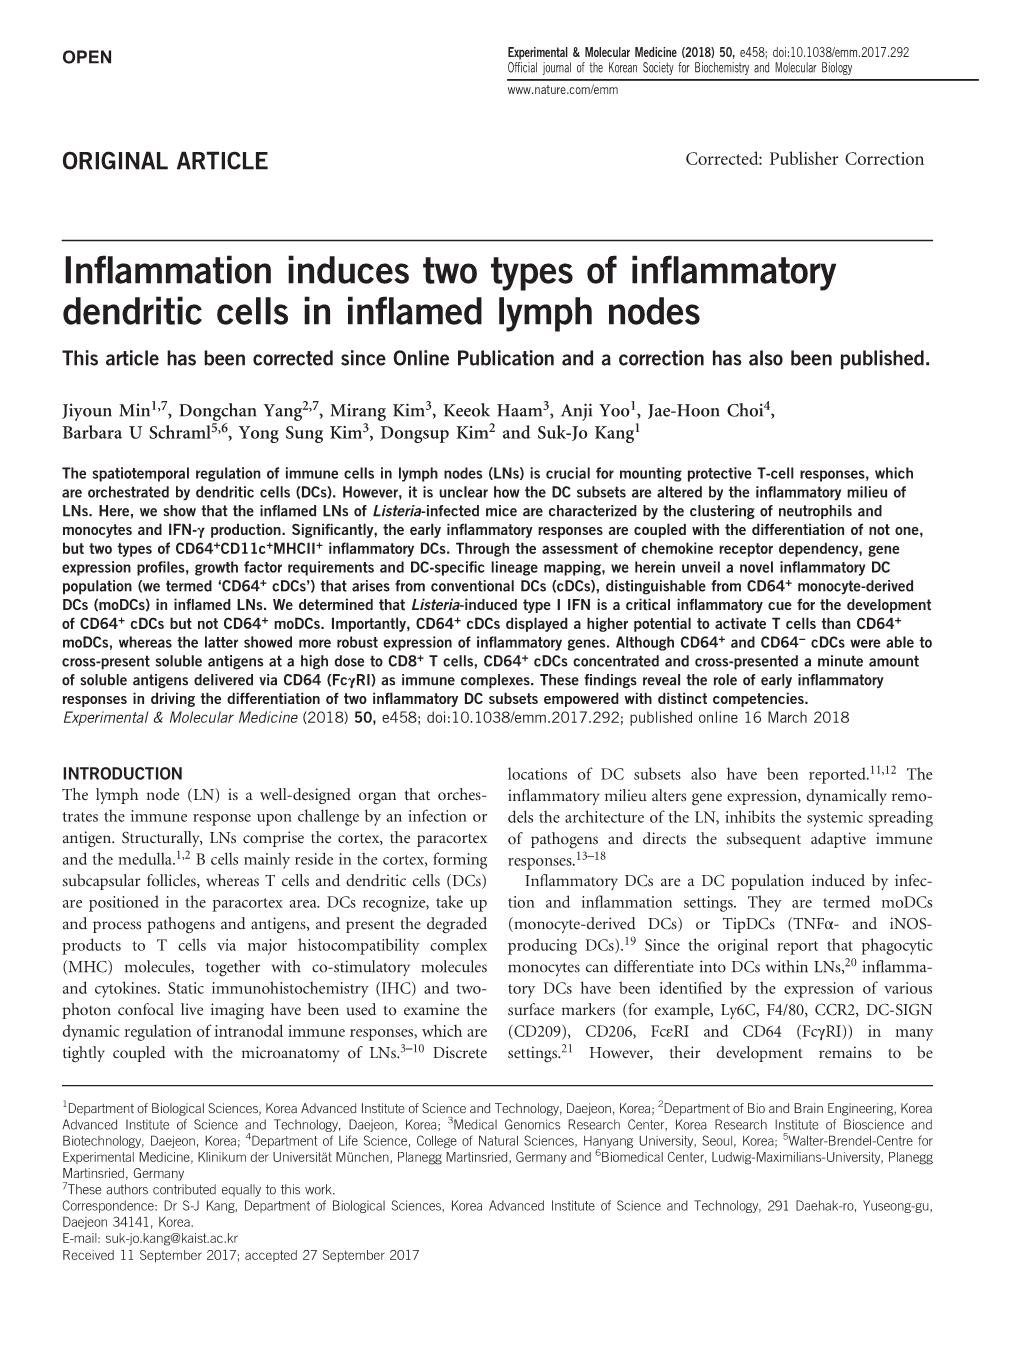 Inflammation Induces Two Types of Inflammatory Dendritic Cells in Inflamed Lymph Nodes